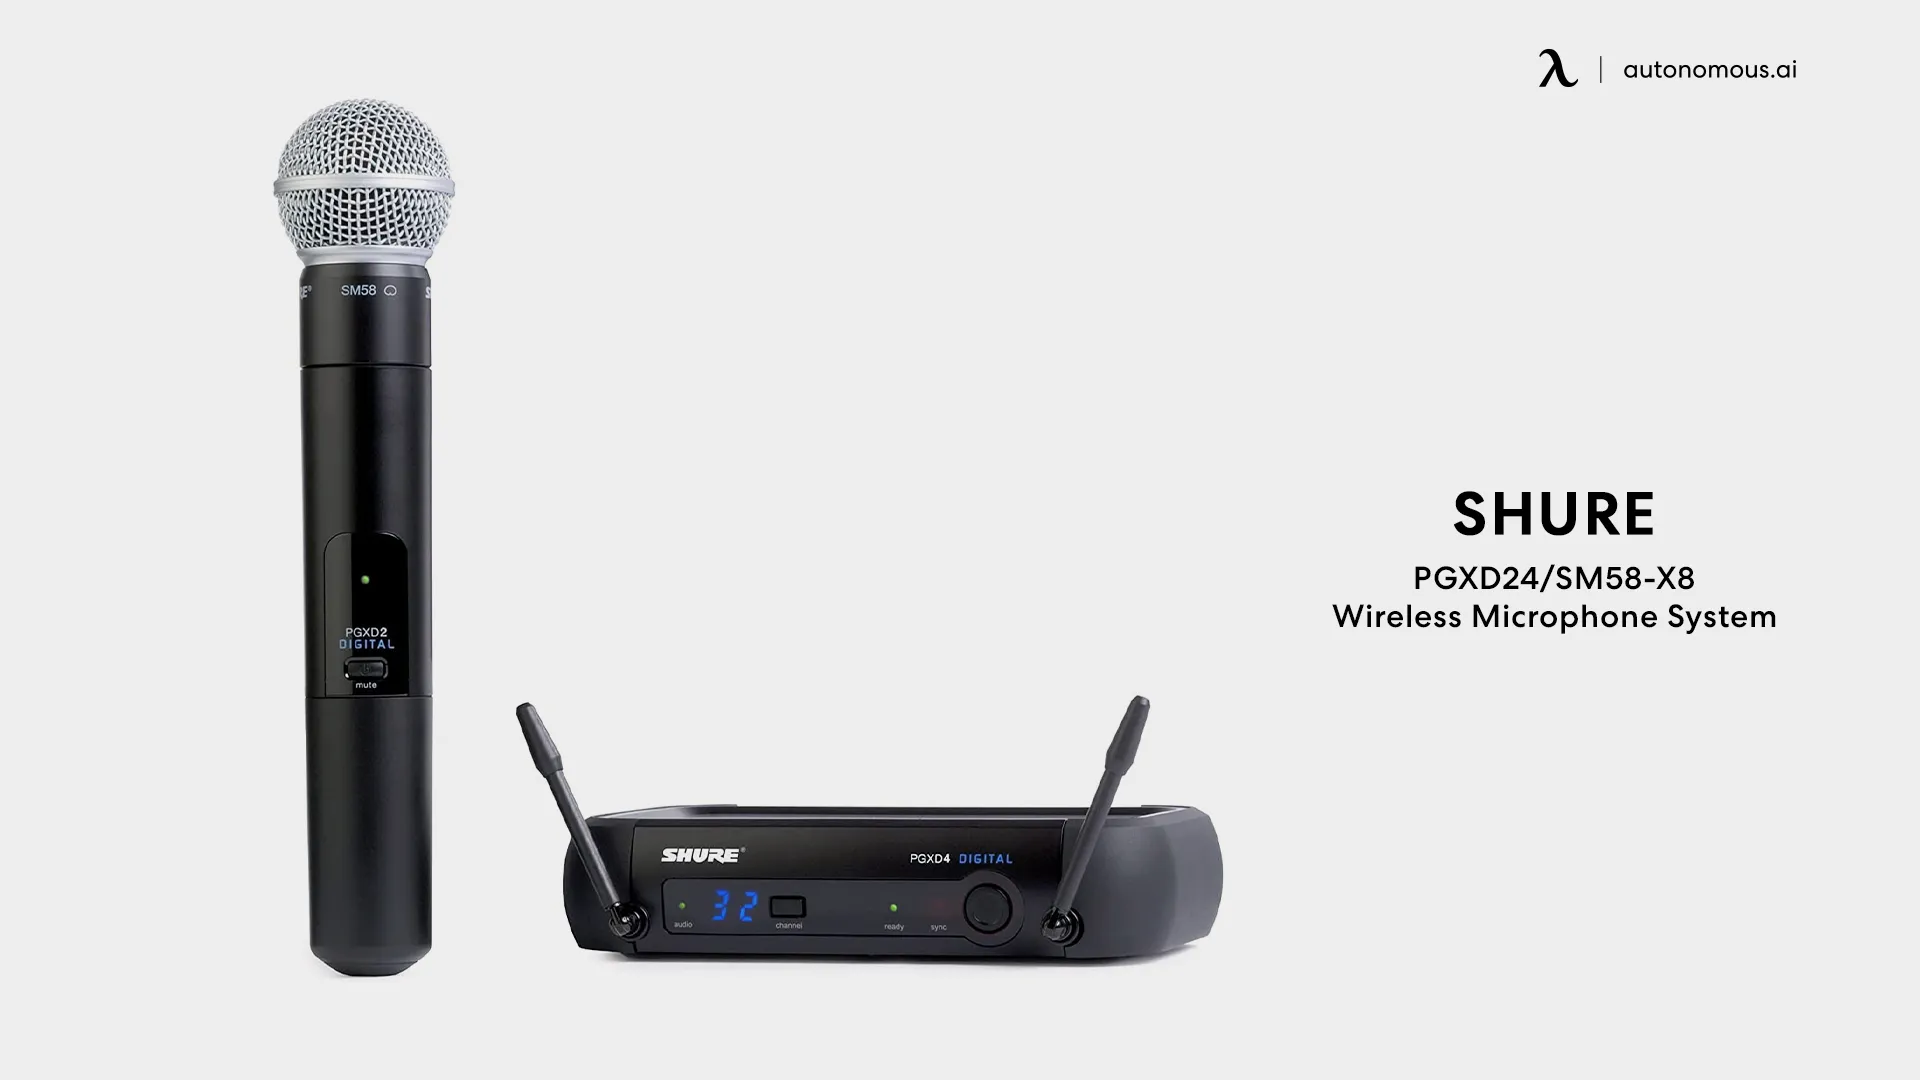 PGXD24/SM58-X8 Wireless Microphone System by Shure